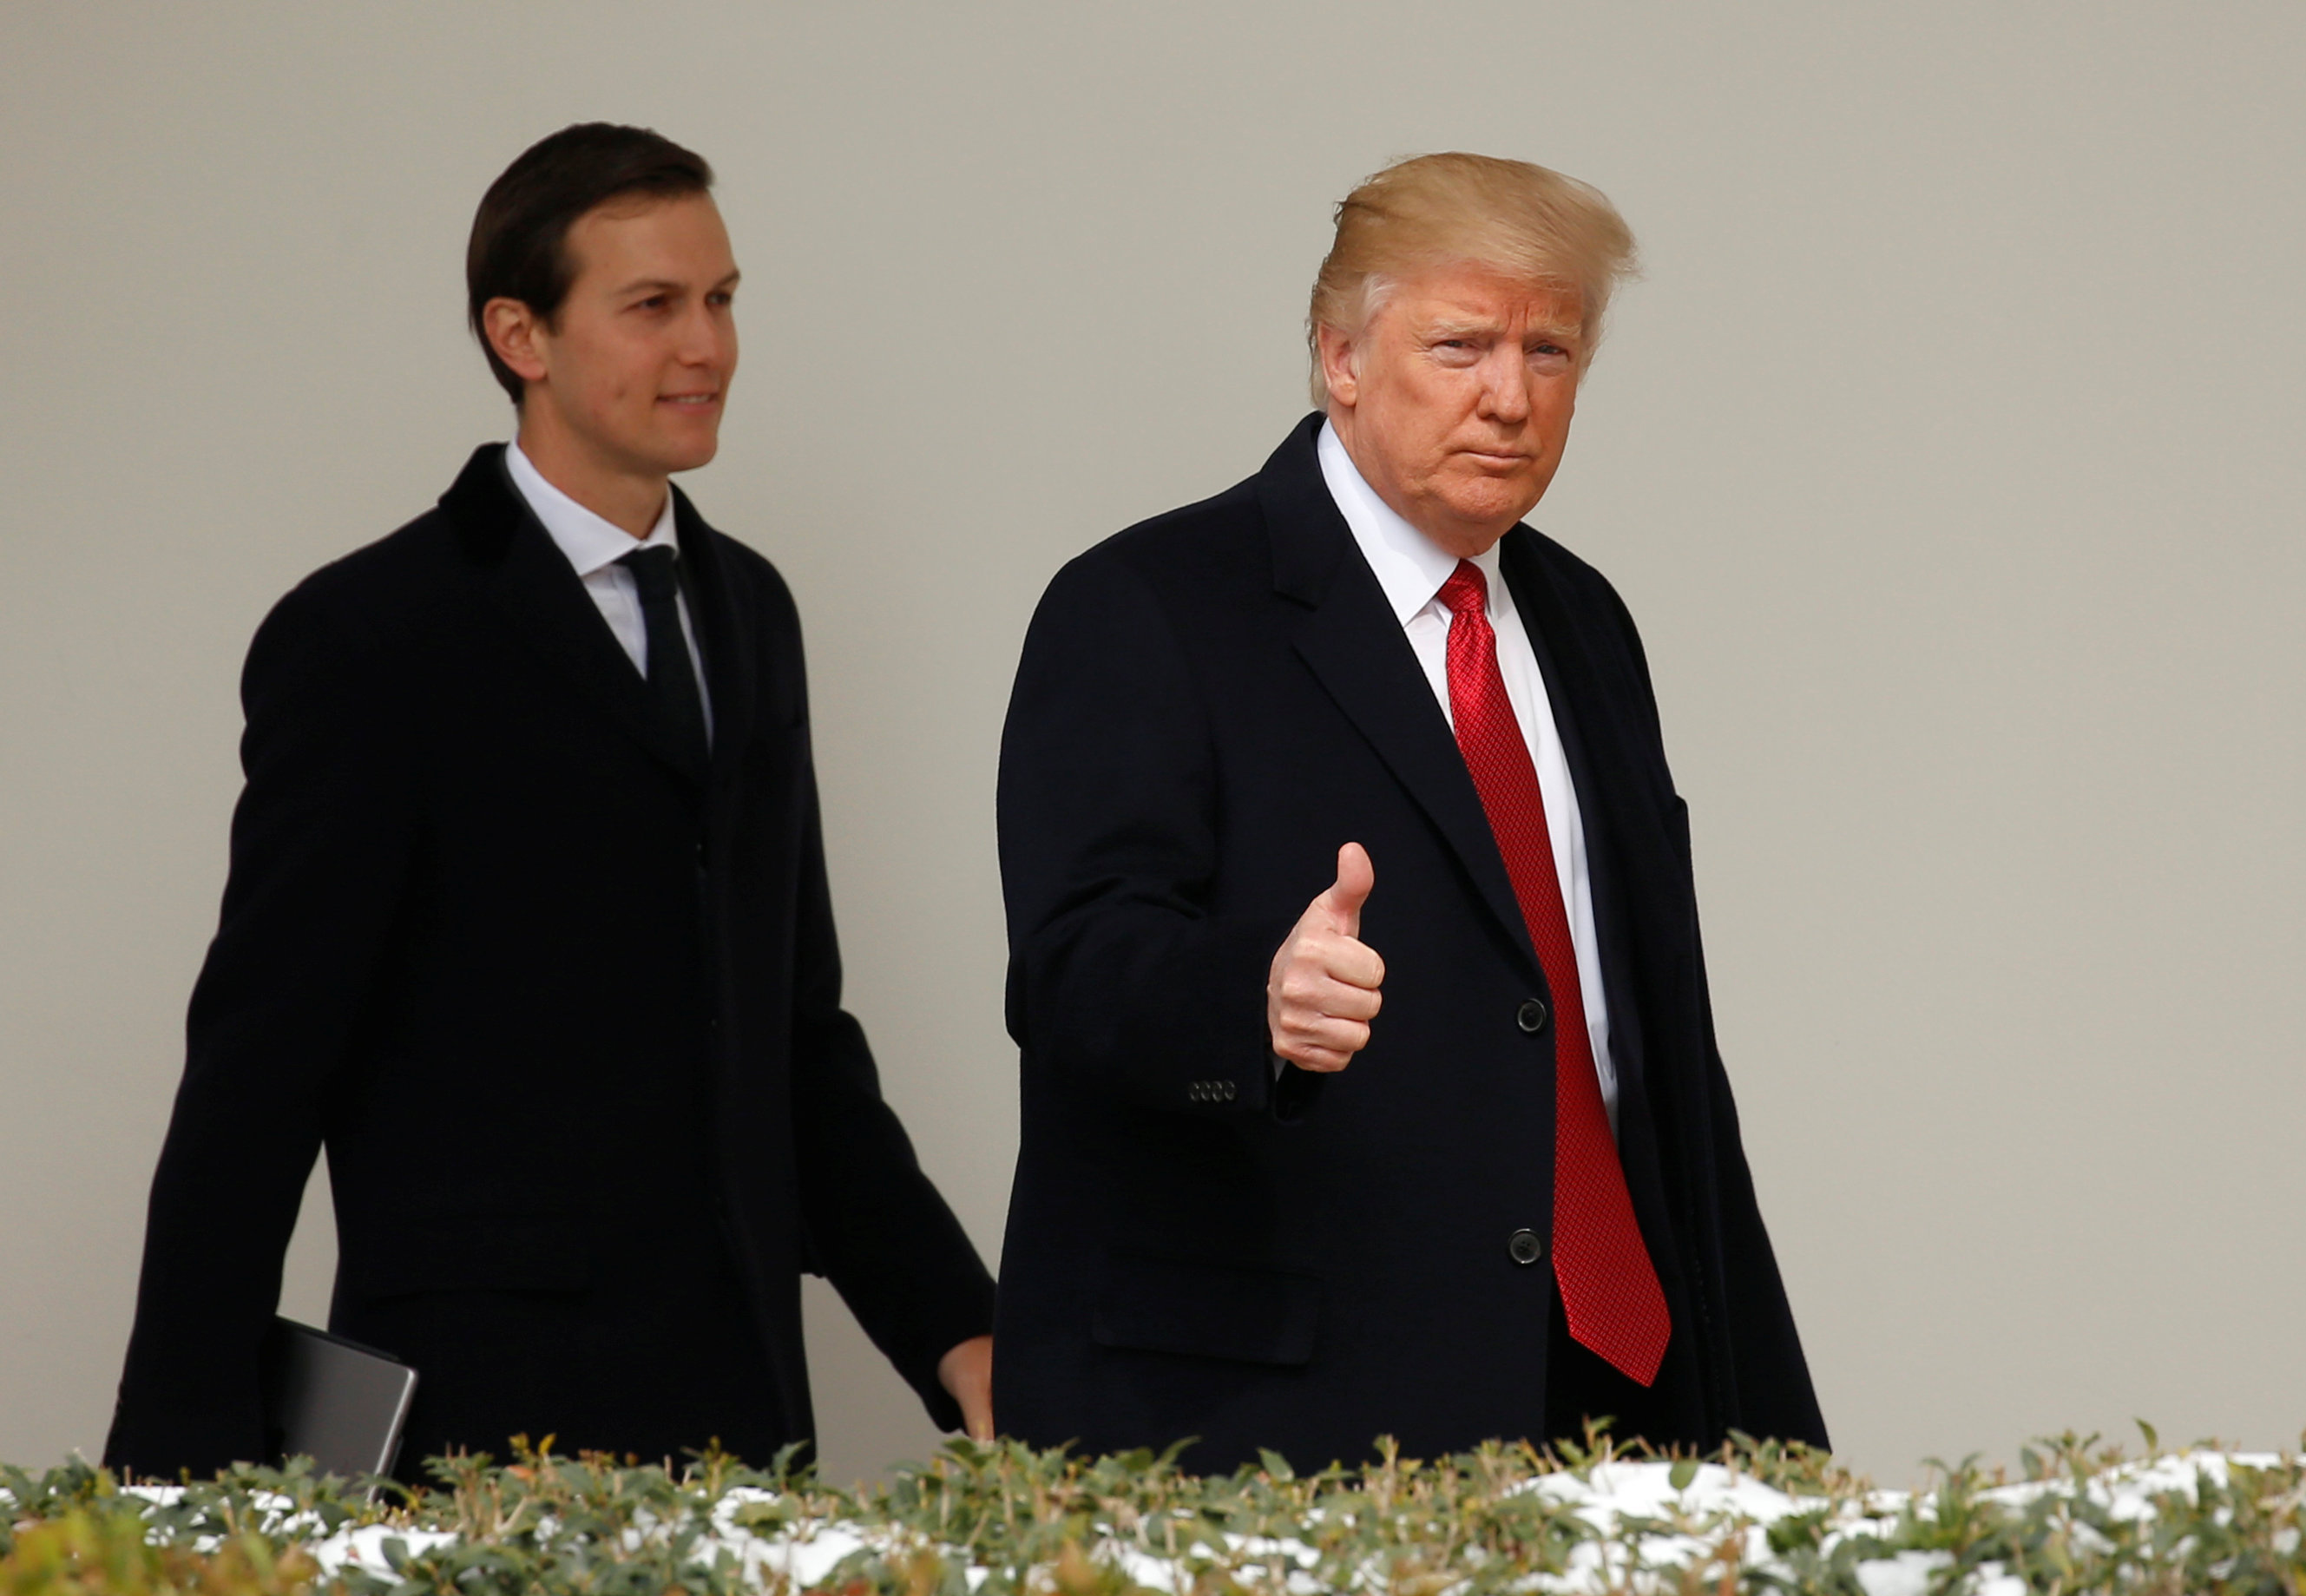 U.S. President Donald Trump gives a thumbs-up as he and White House Senior Advisor Jared Kushner depart the White House in Washington, U.S., March 15, 2017